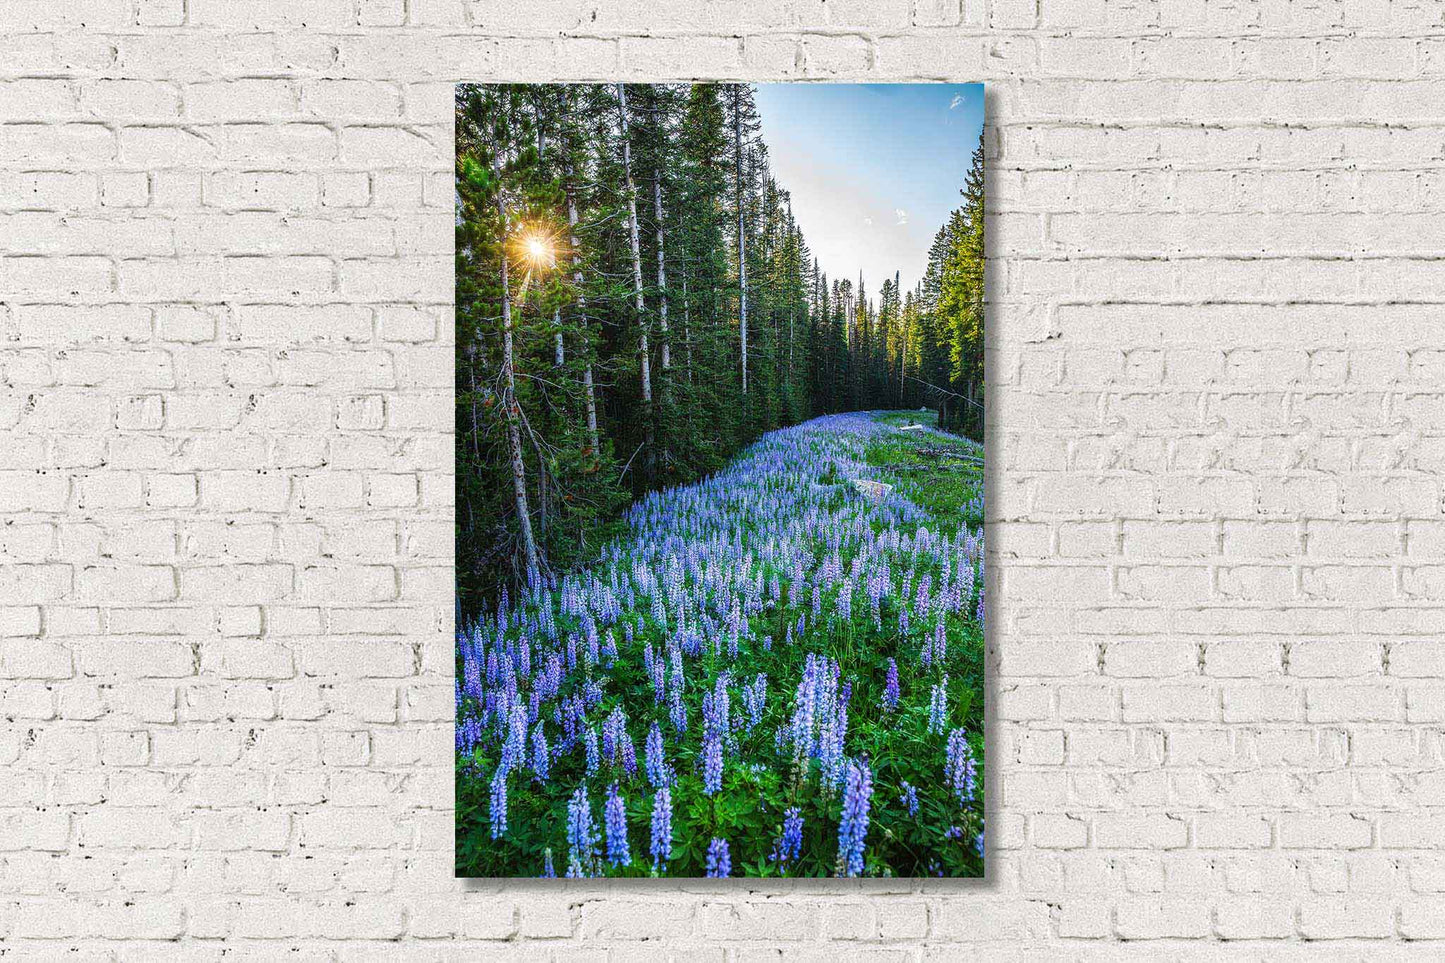 Rocky Mountains metal print of purple lupine wildflowers covering the forest floor as the sun twinkles through pine trees on a summer day in Montana by Sean Ramsey of Southern Plains Photography.